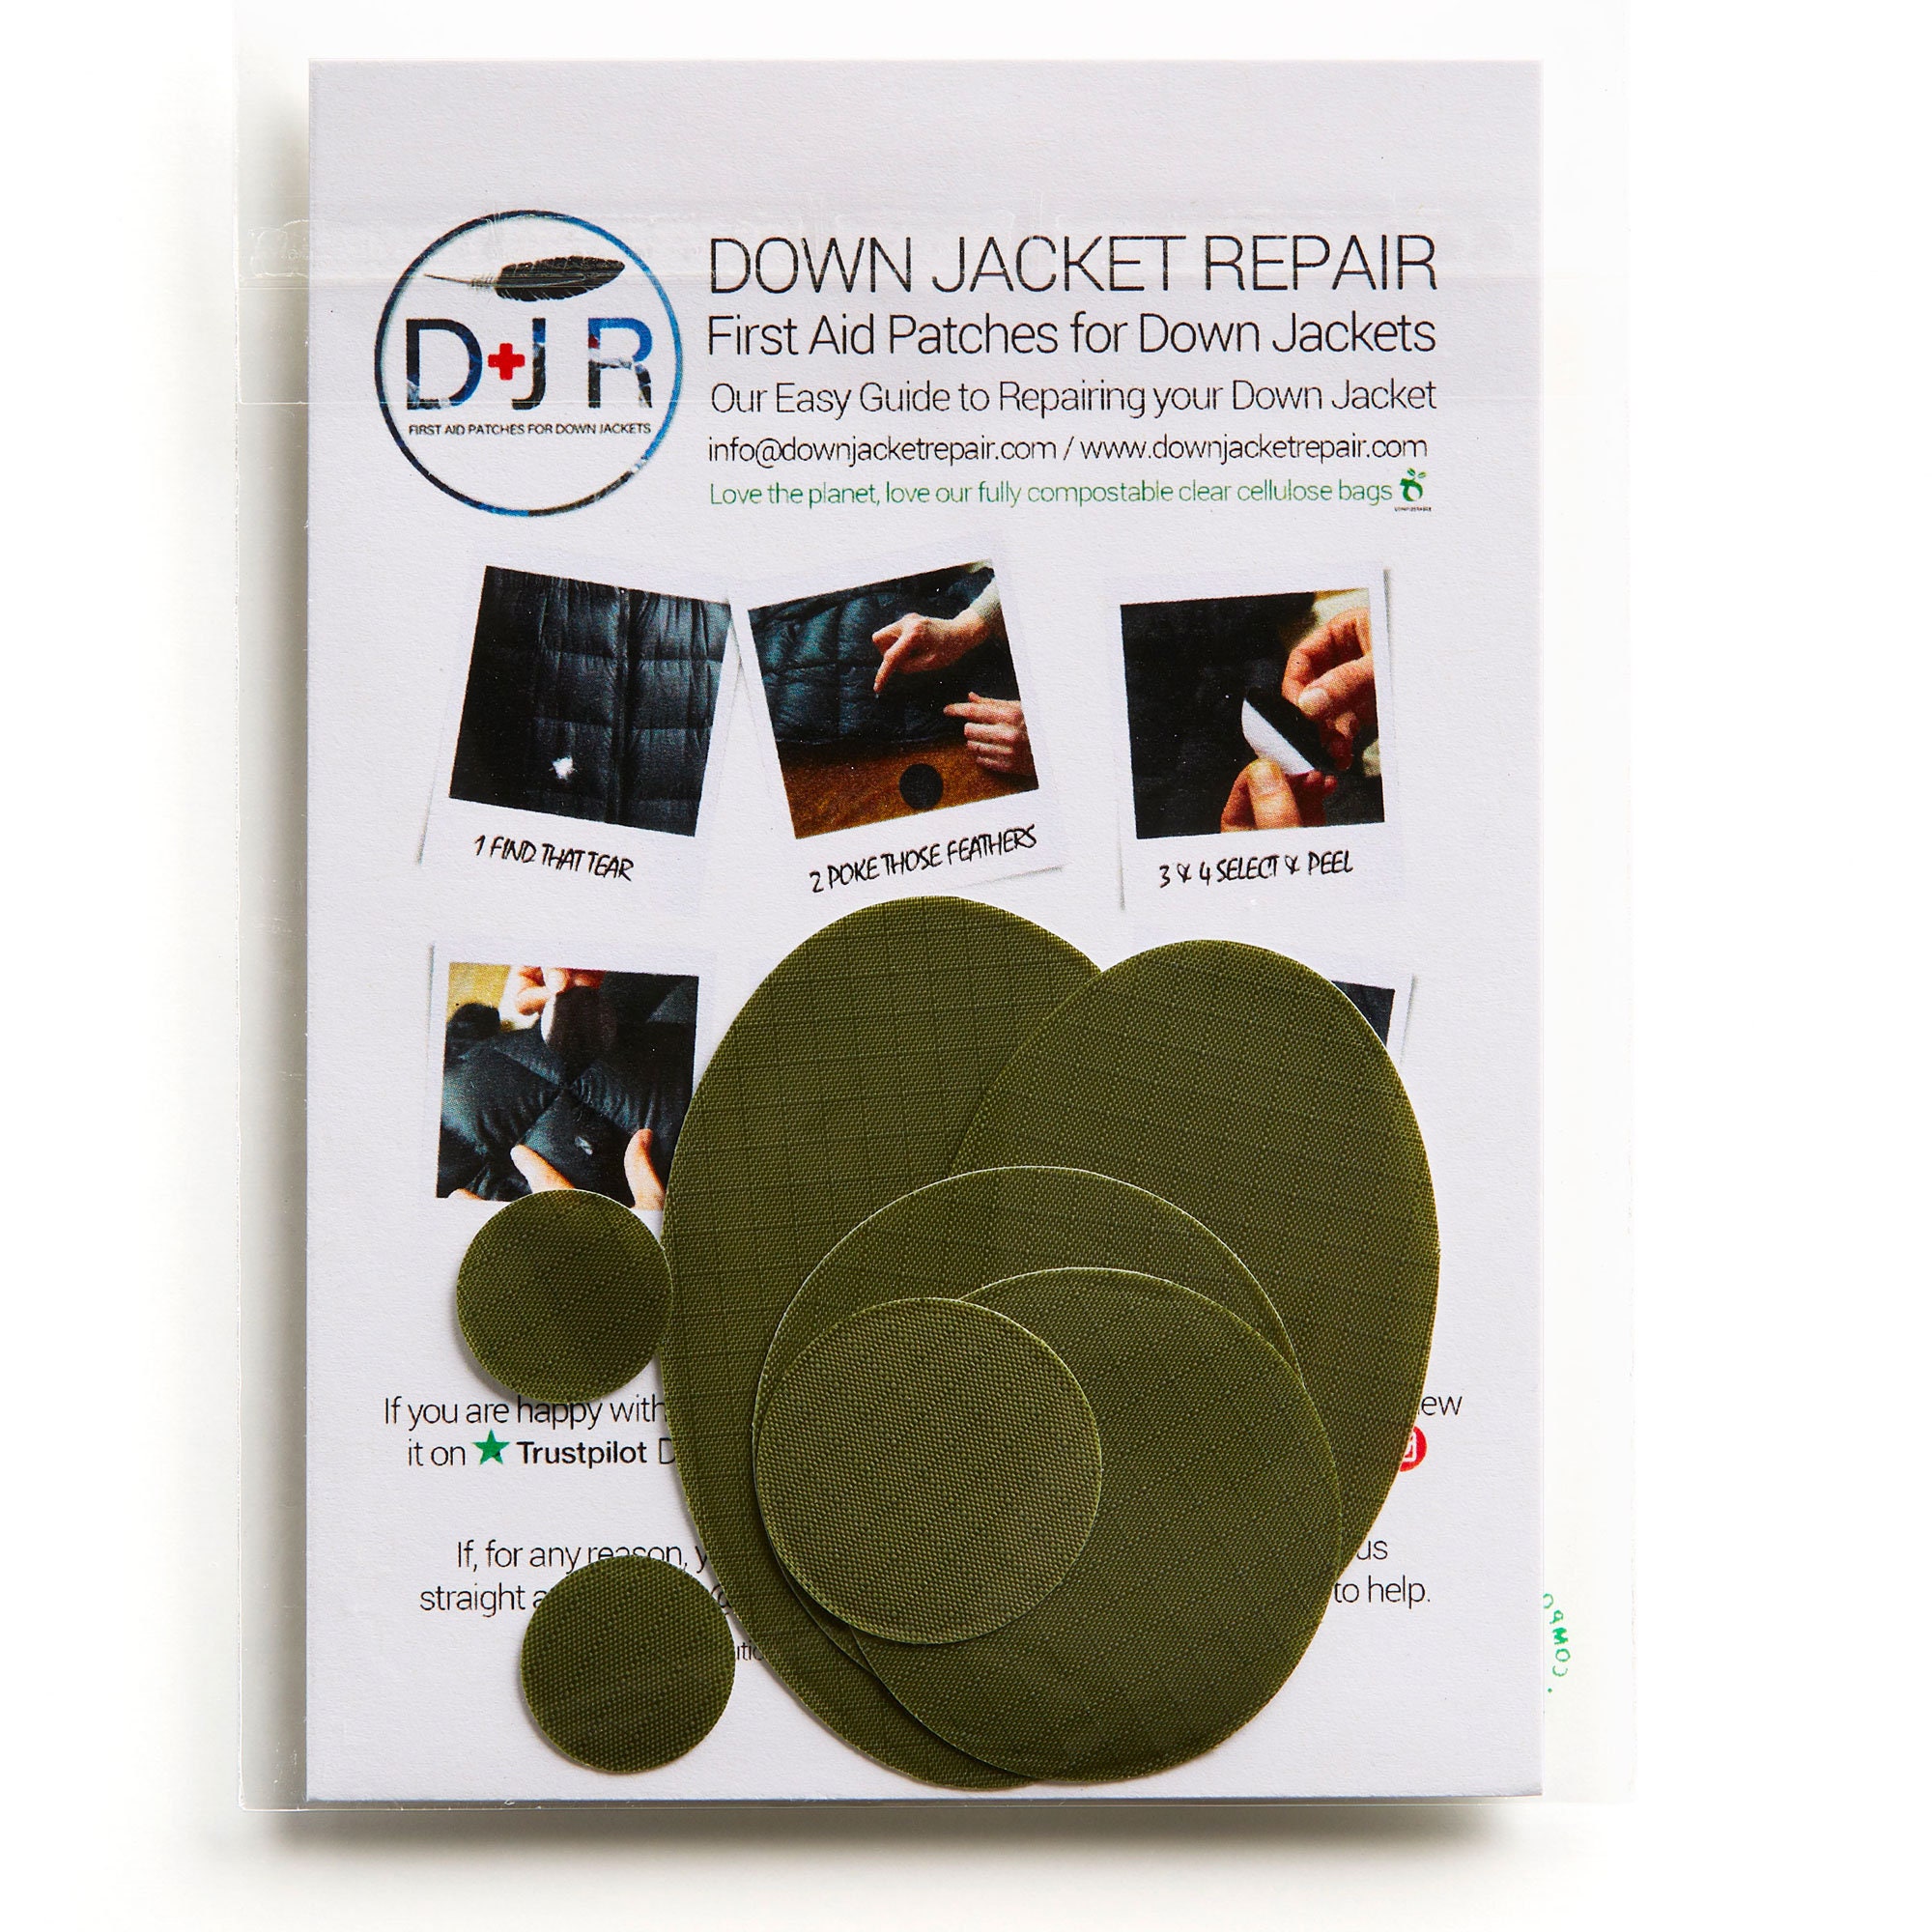 Self-adhesive Down Jacket Repair Patches Olive Green for Down Jackets or  Sleeping Bags First Aid for Down Jackets 